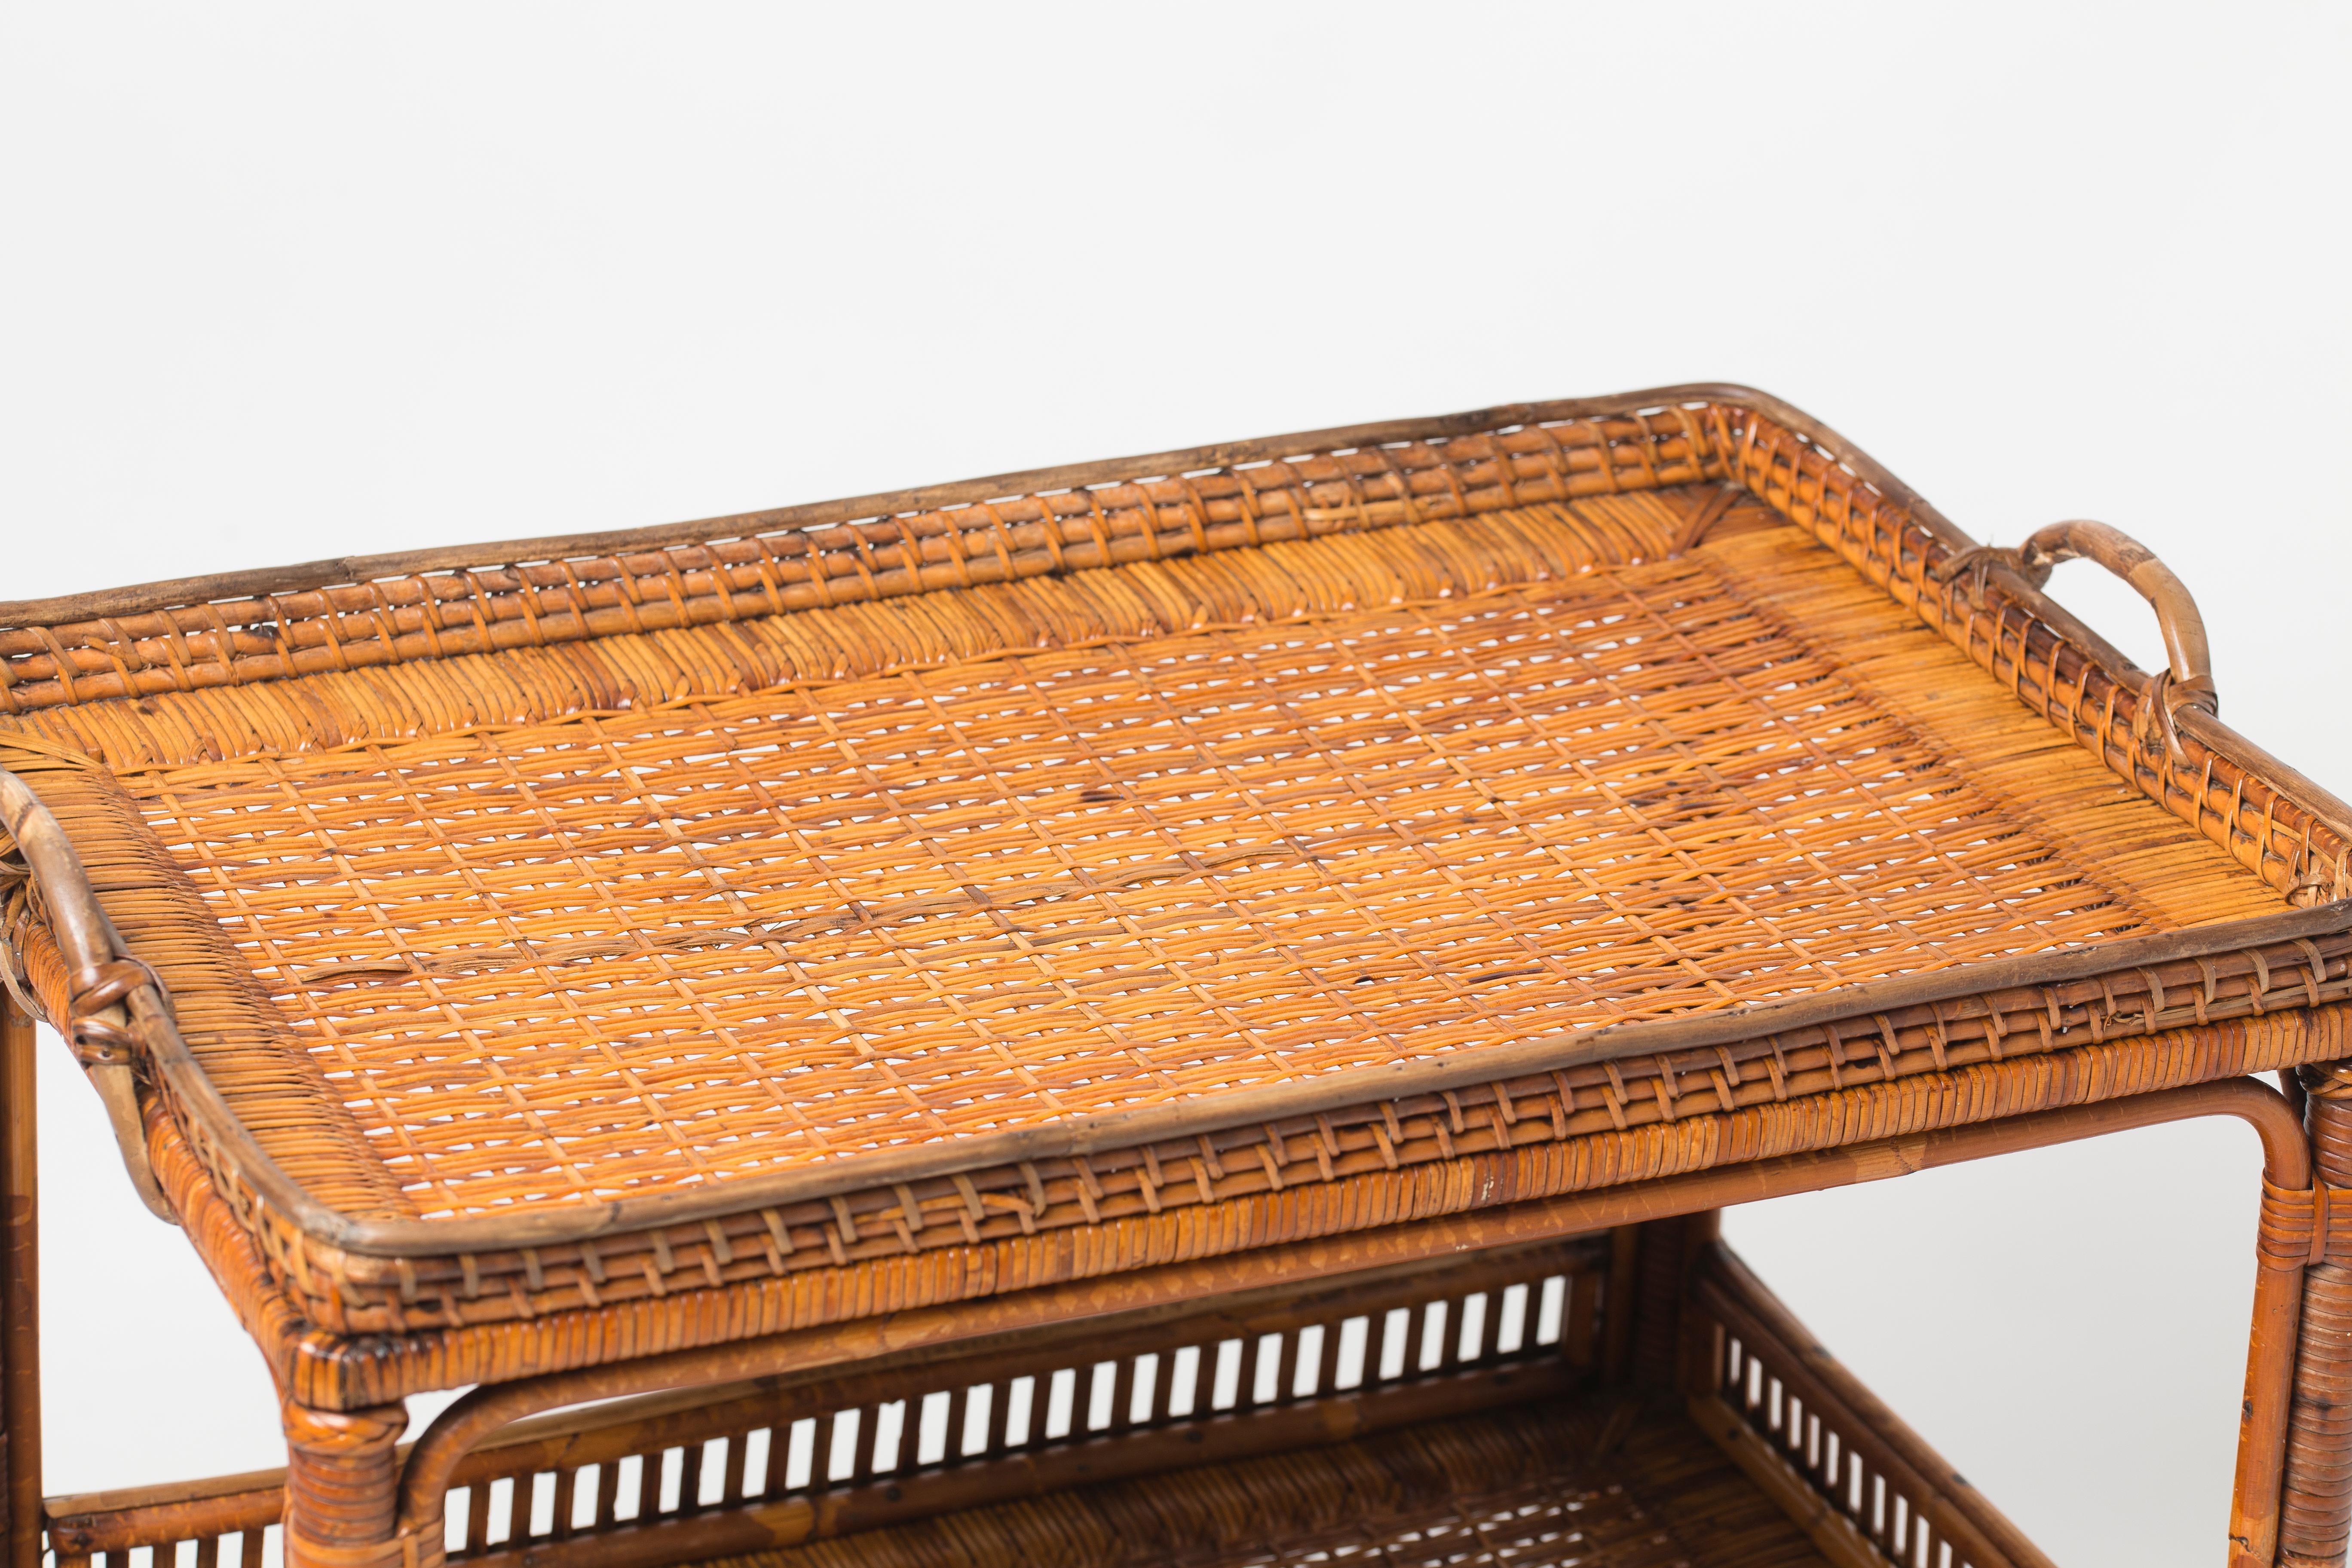 Bamboo Serving Table in Woven Rattan, France, circa 1900